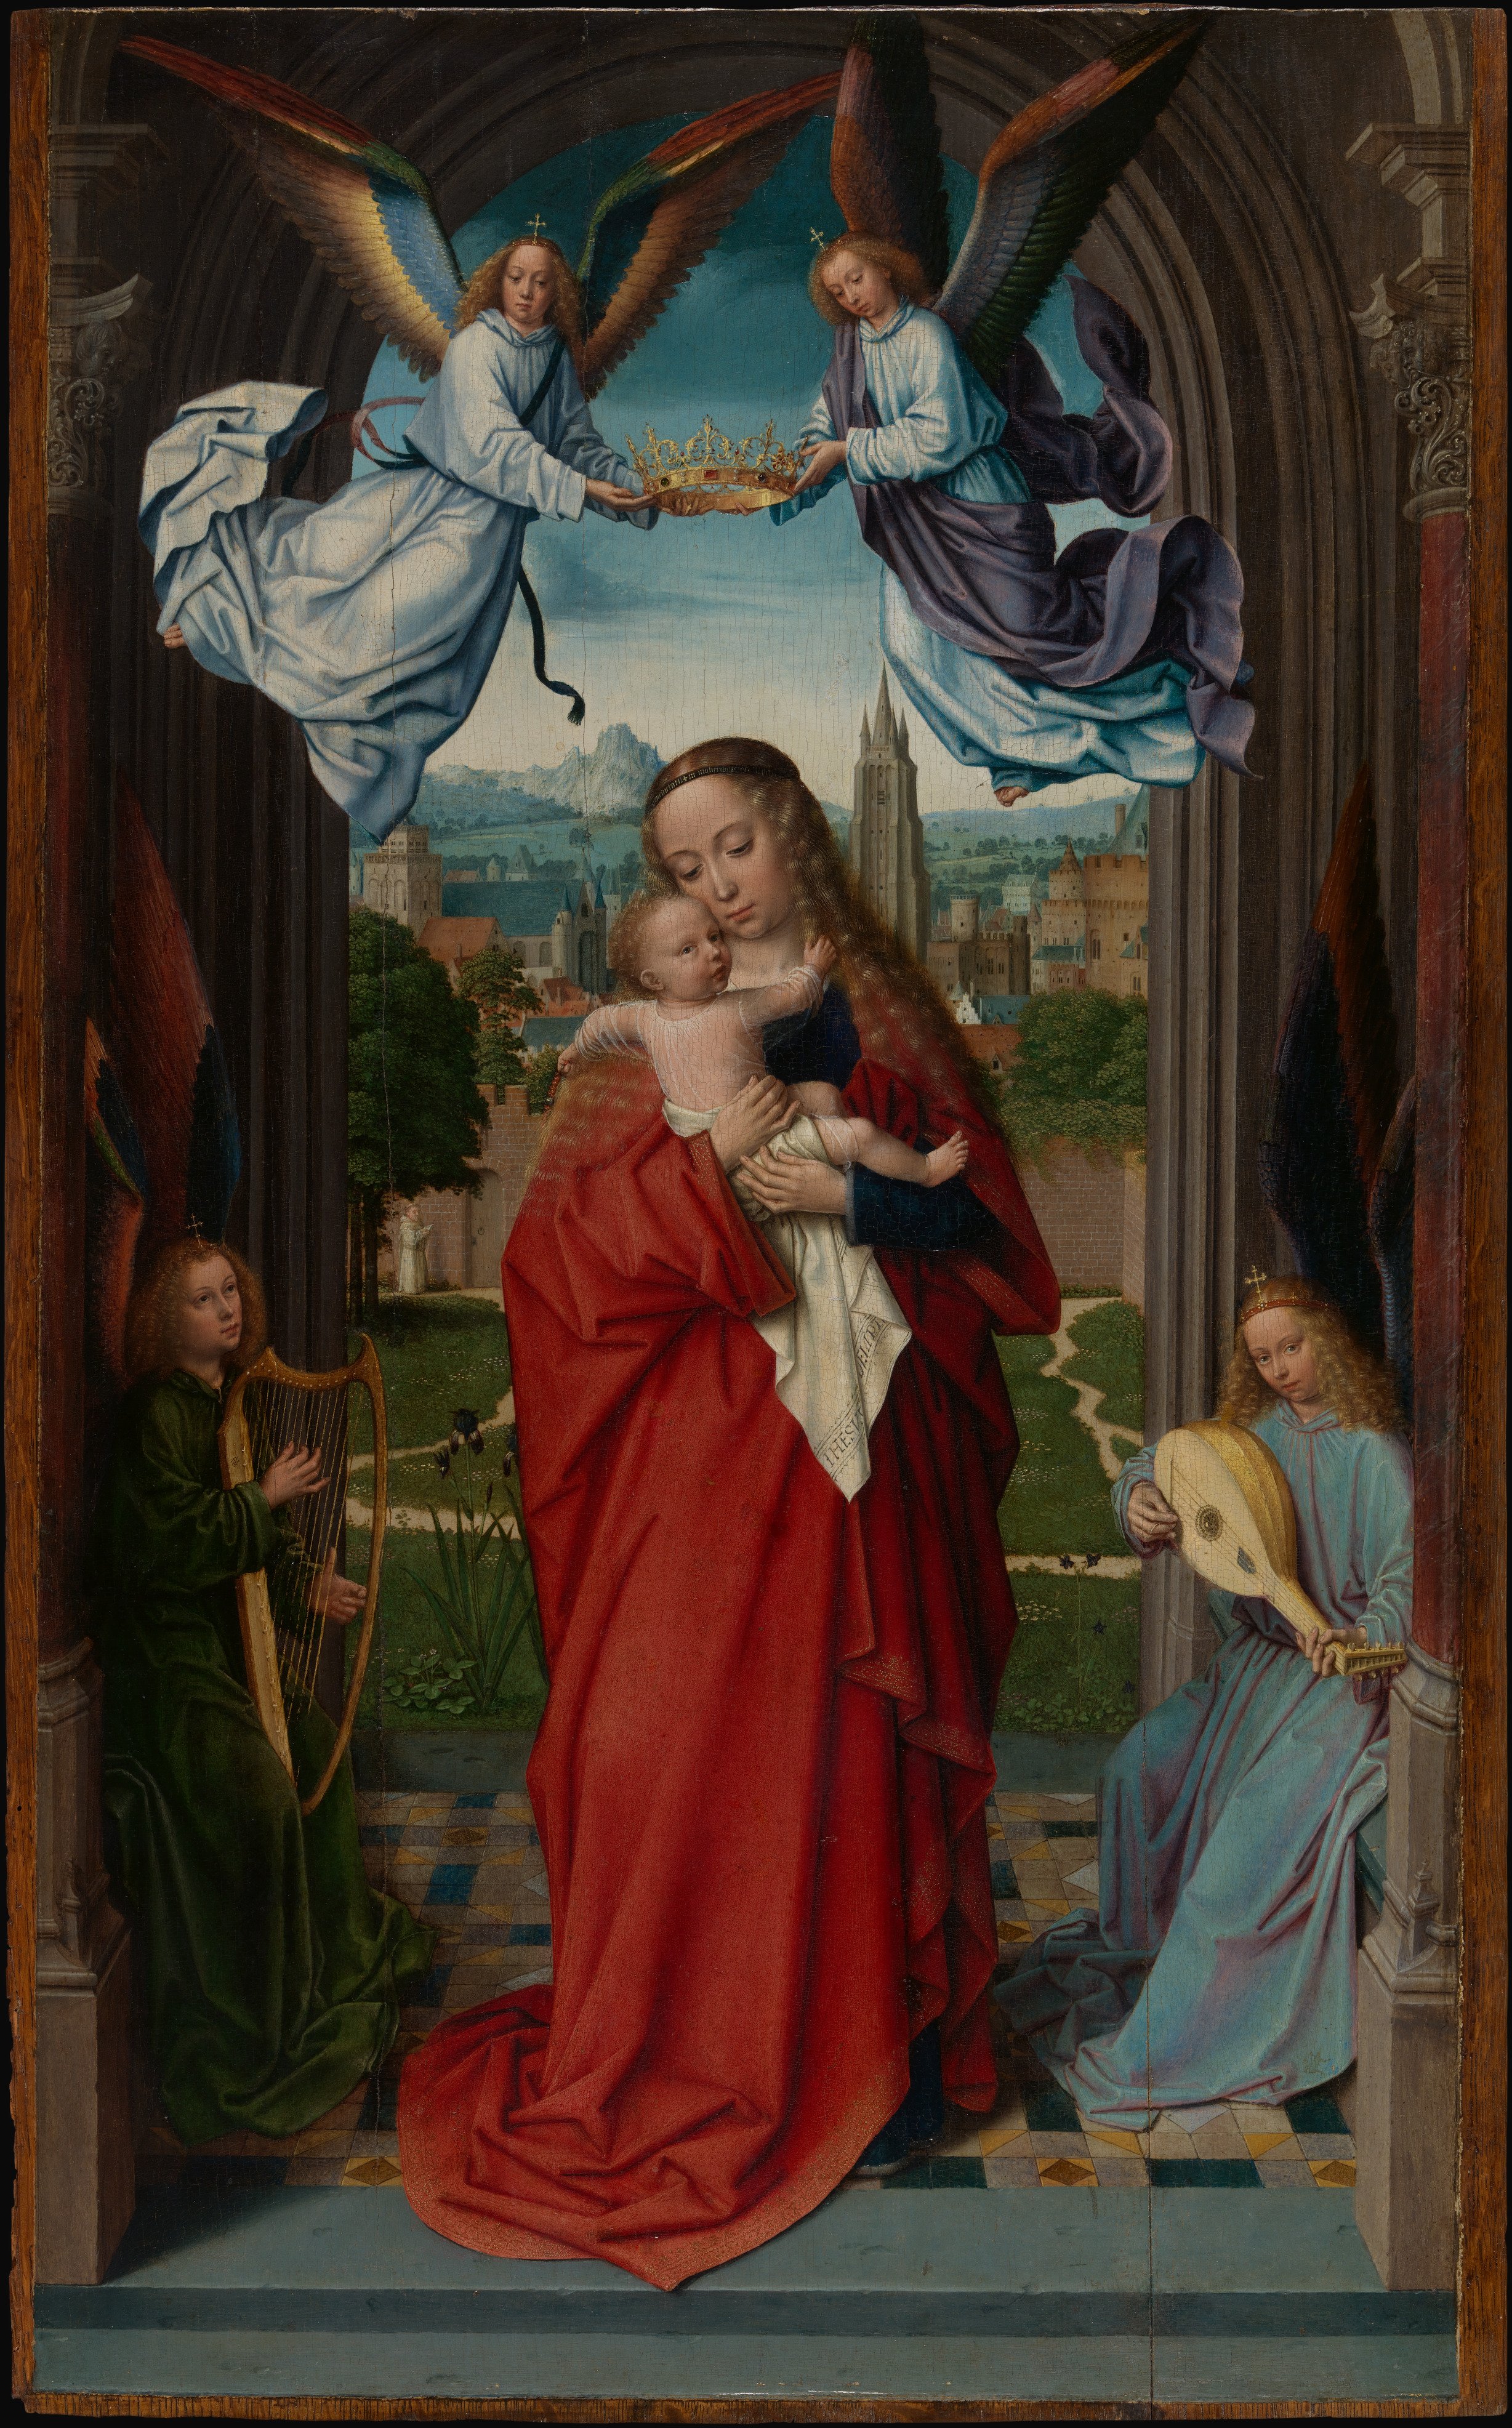 Gerard David, MetMuseum.org, "Virgin and Child with Four Angels" Public Domain